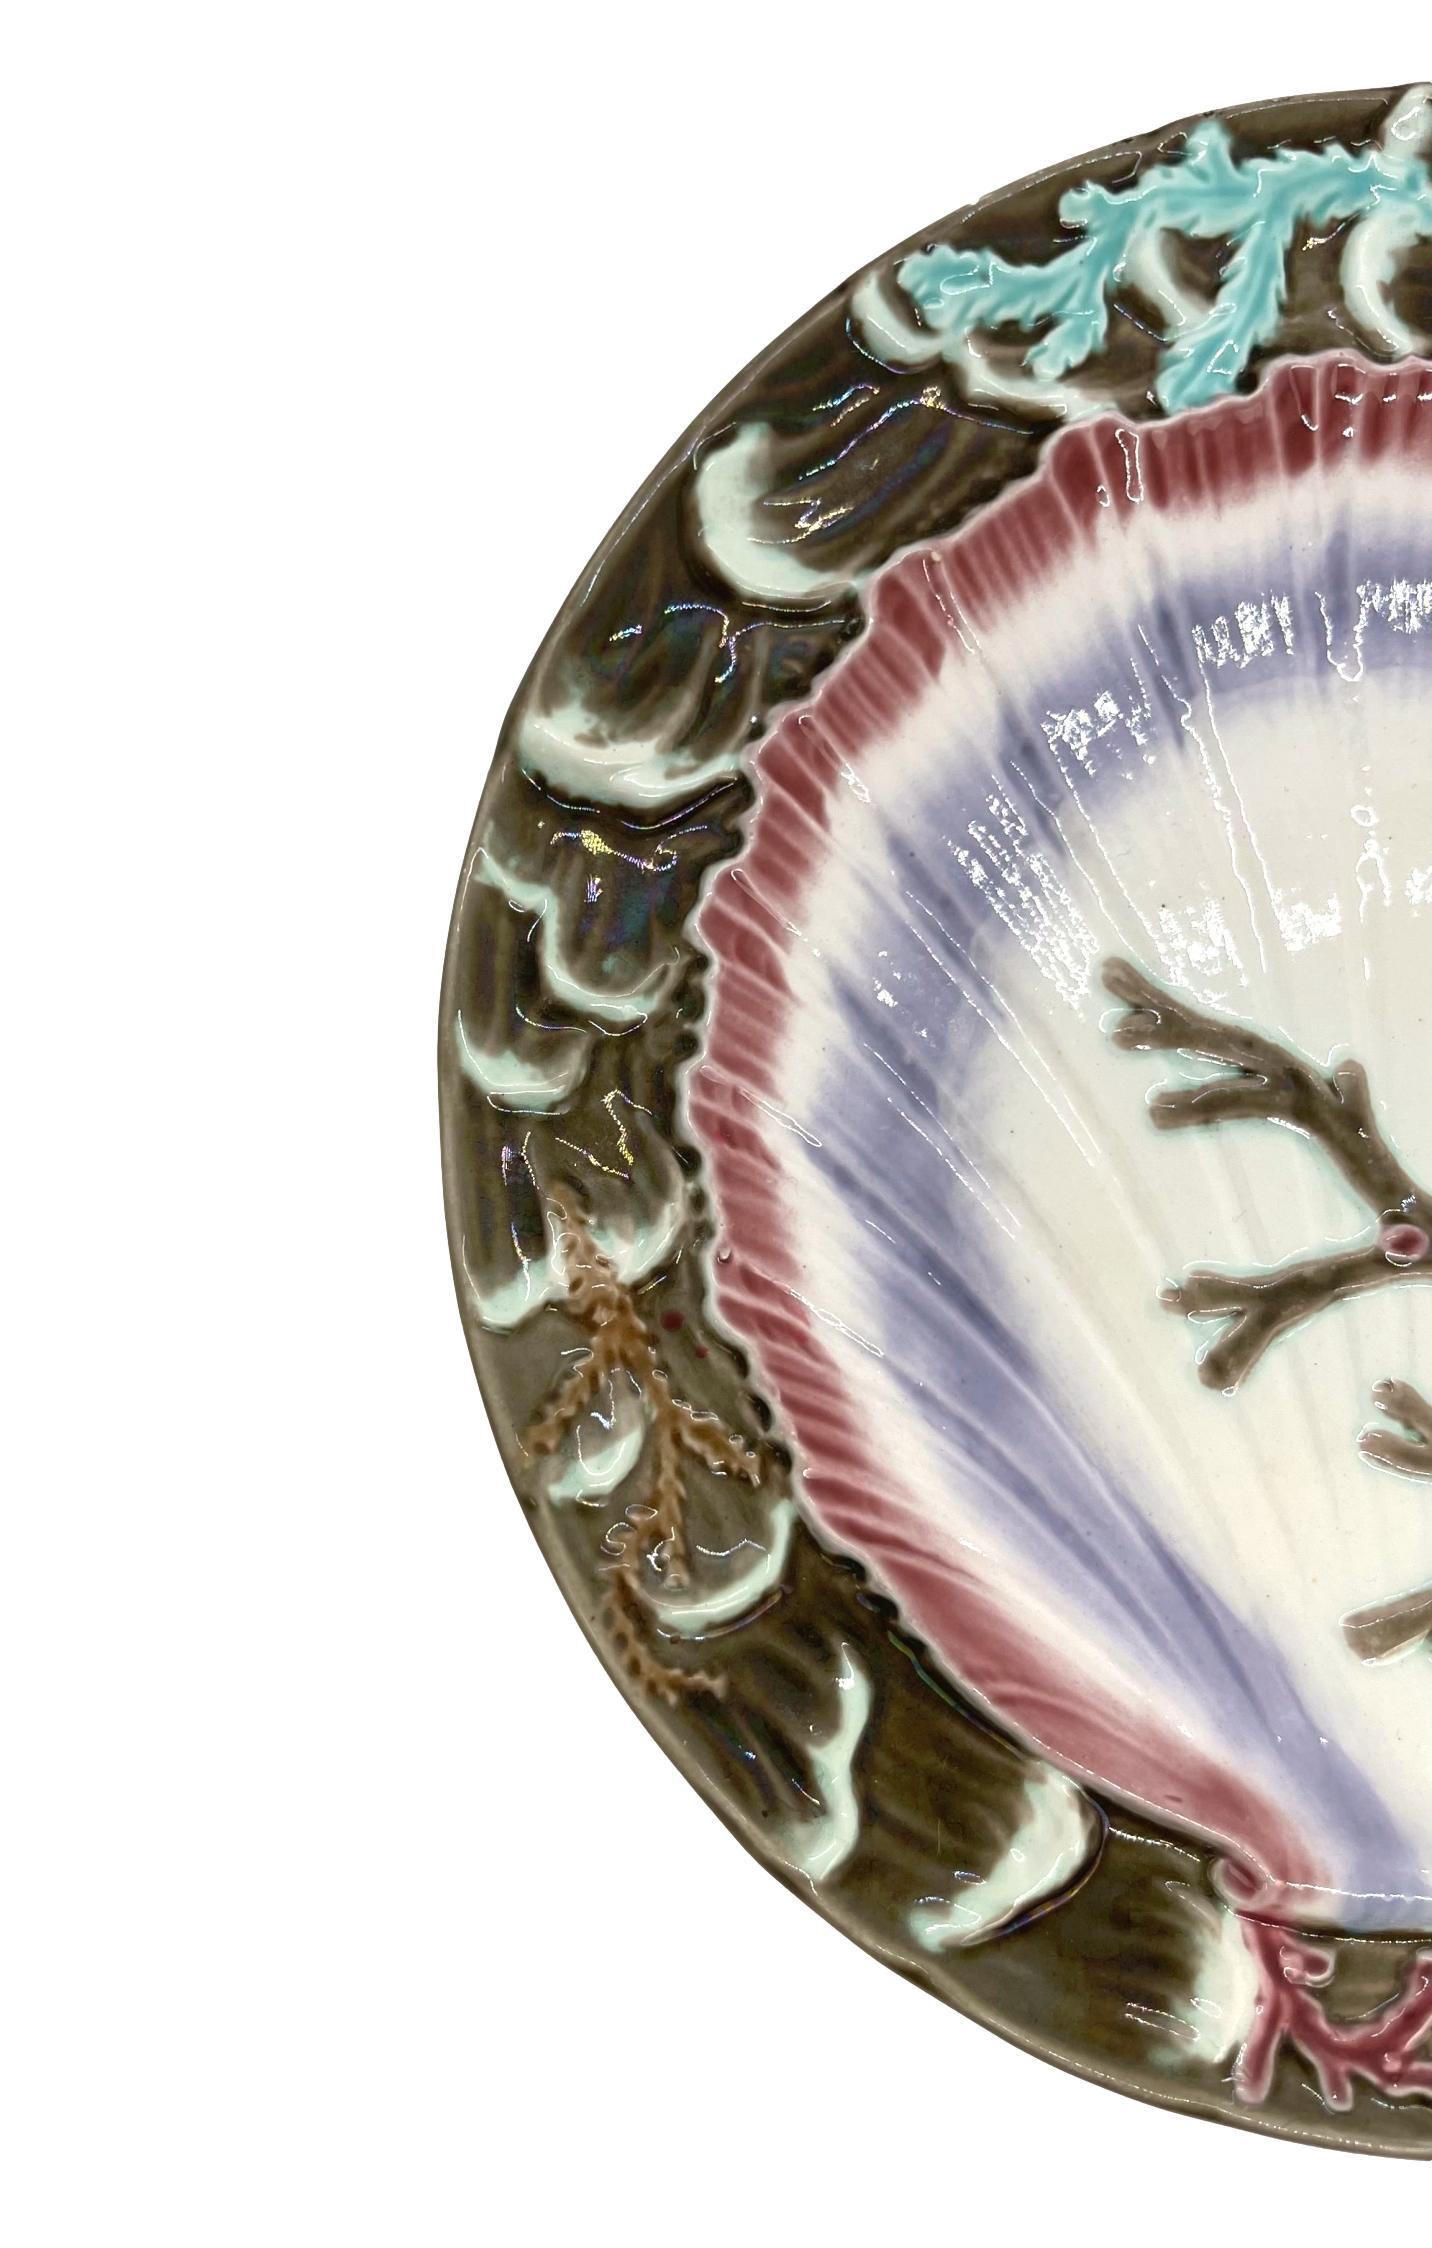 Wedgwood Majolica ocean plate, with a large central shell and seaweed, bordered with relief-molded waves, the reverse with impressed marks: 'Wedgwood,' and Wedgwood date letter, 'N' for 1885, with underglaze painted design number, '2934,' which